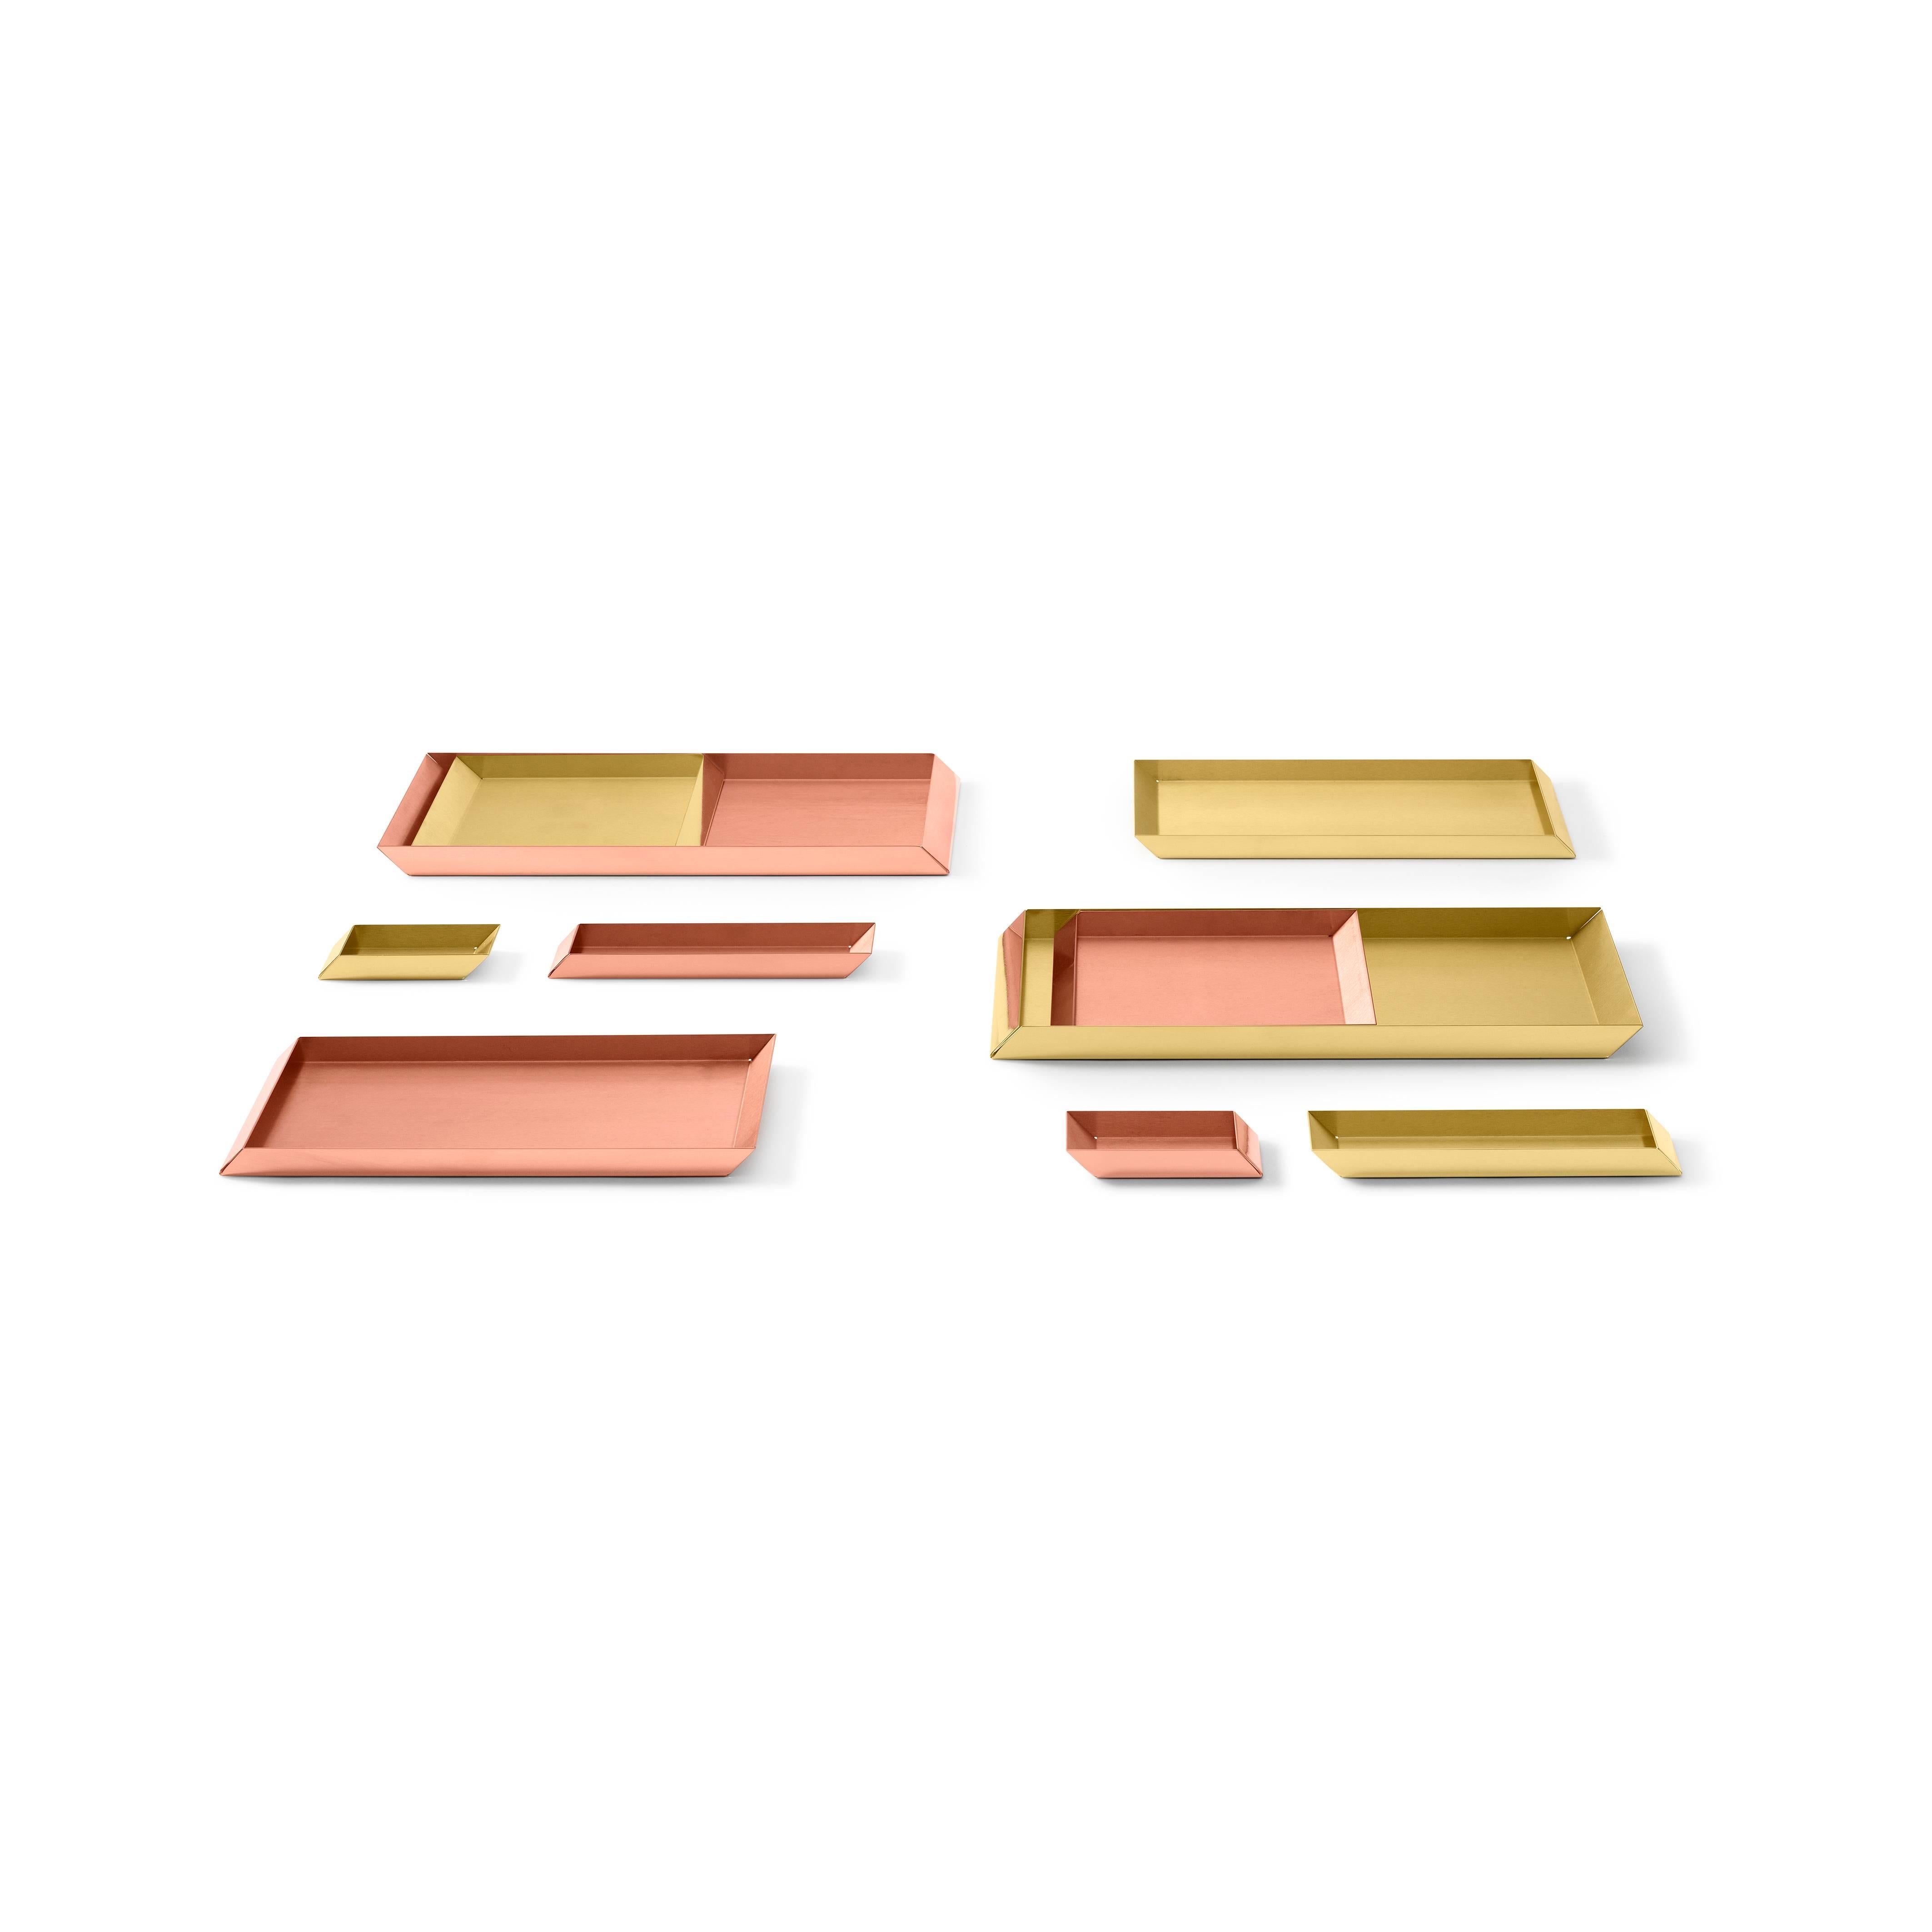 Trays in copper with a rose gold finish. The compositional scheme of this family of small trays is the axonometric isometric projection of two parallelepipeds which creates a three-dimensional optical effect implemented by inclined edges and by